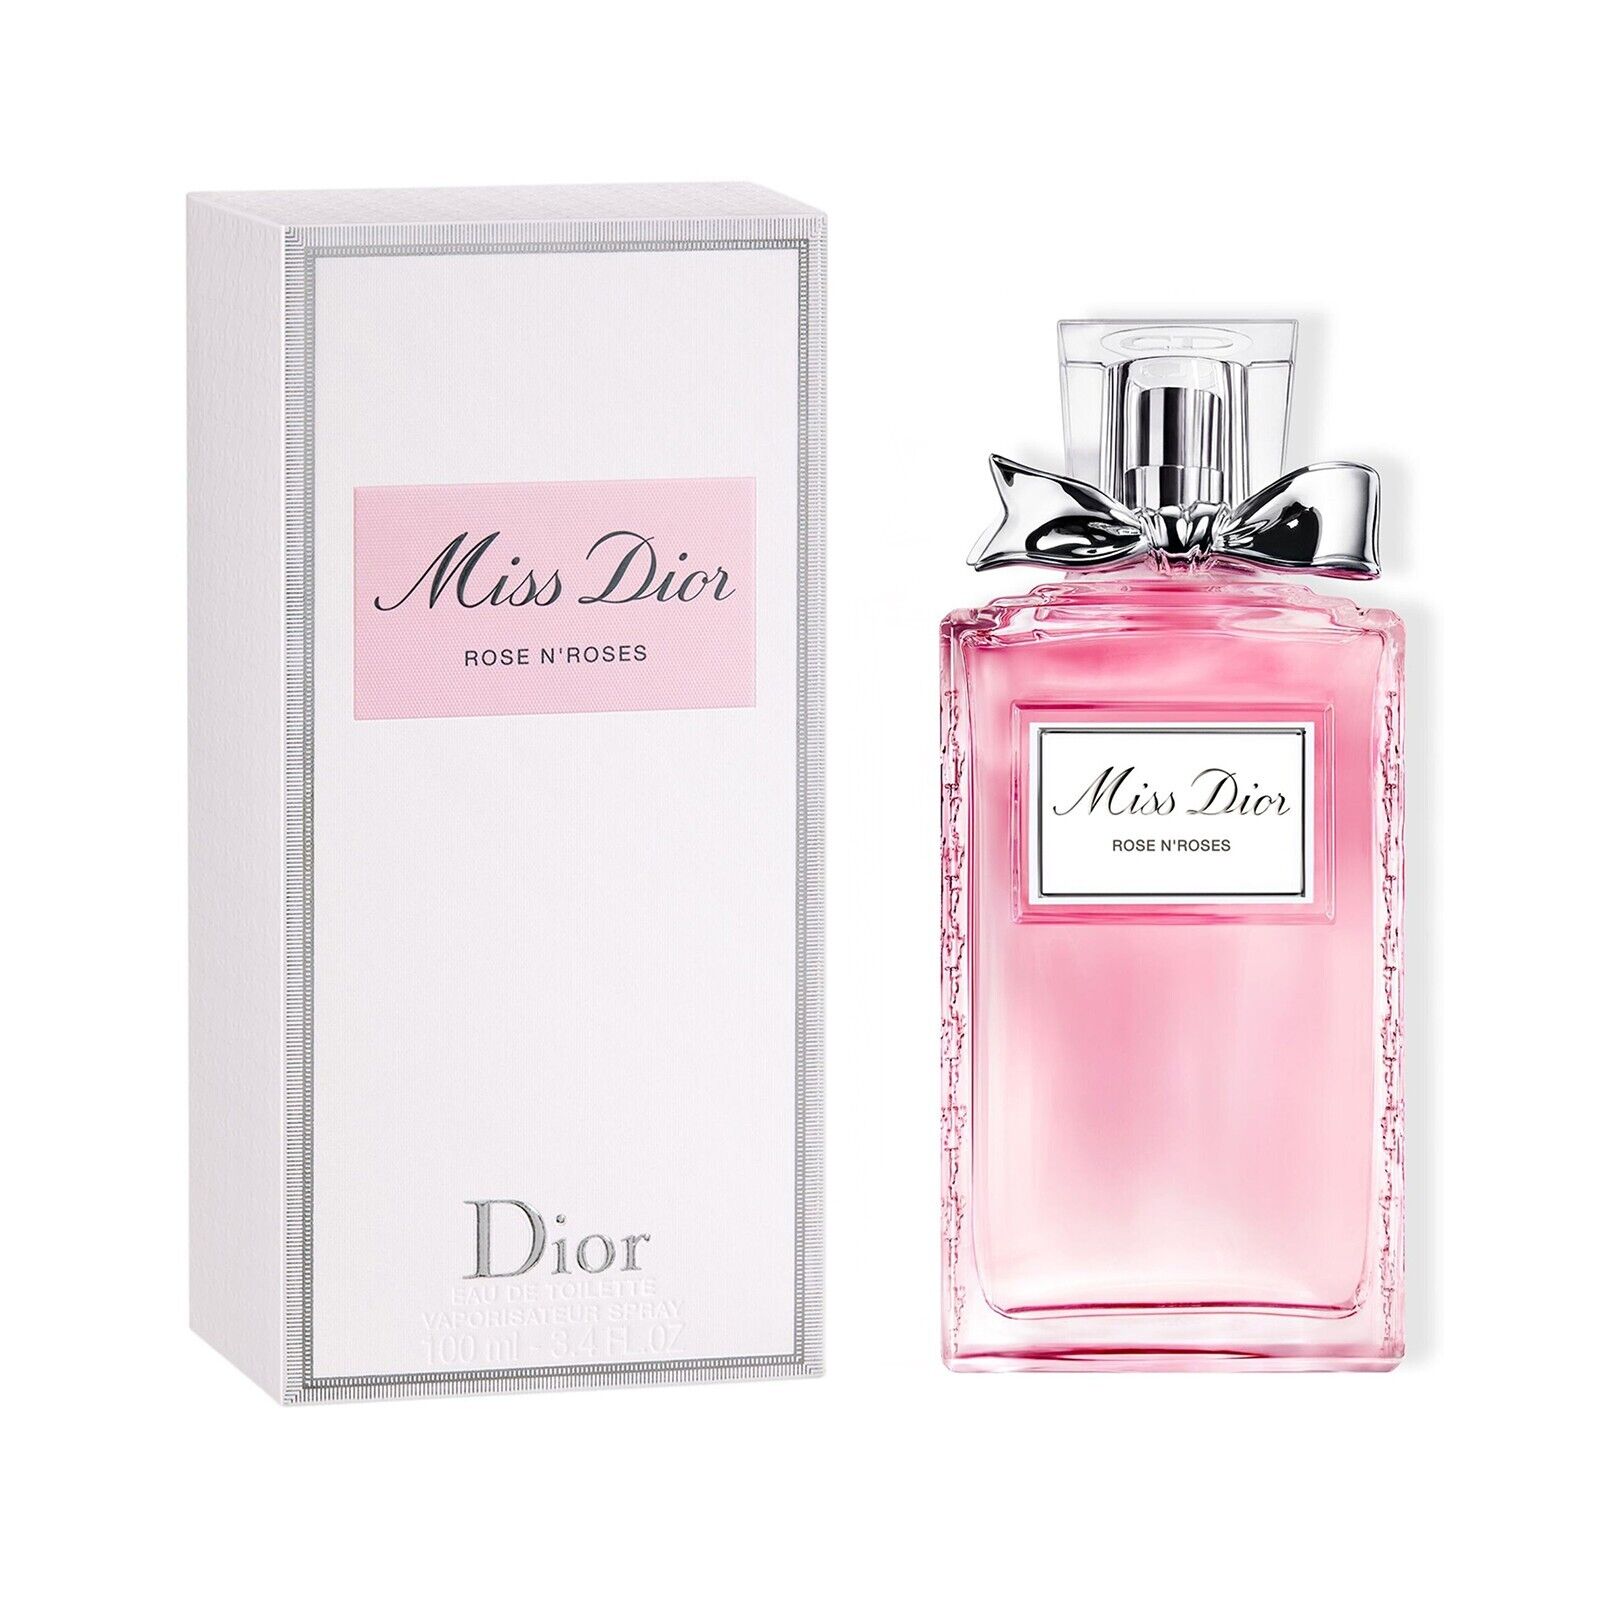 Miss Dior Rose N' Roses 3.4 oz EDT Perfume for Women New In Box